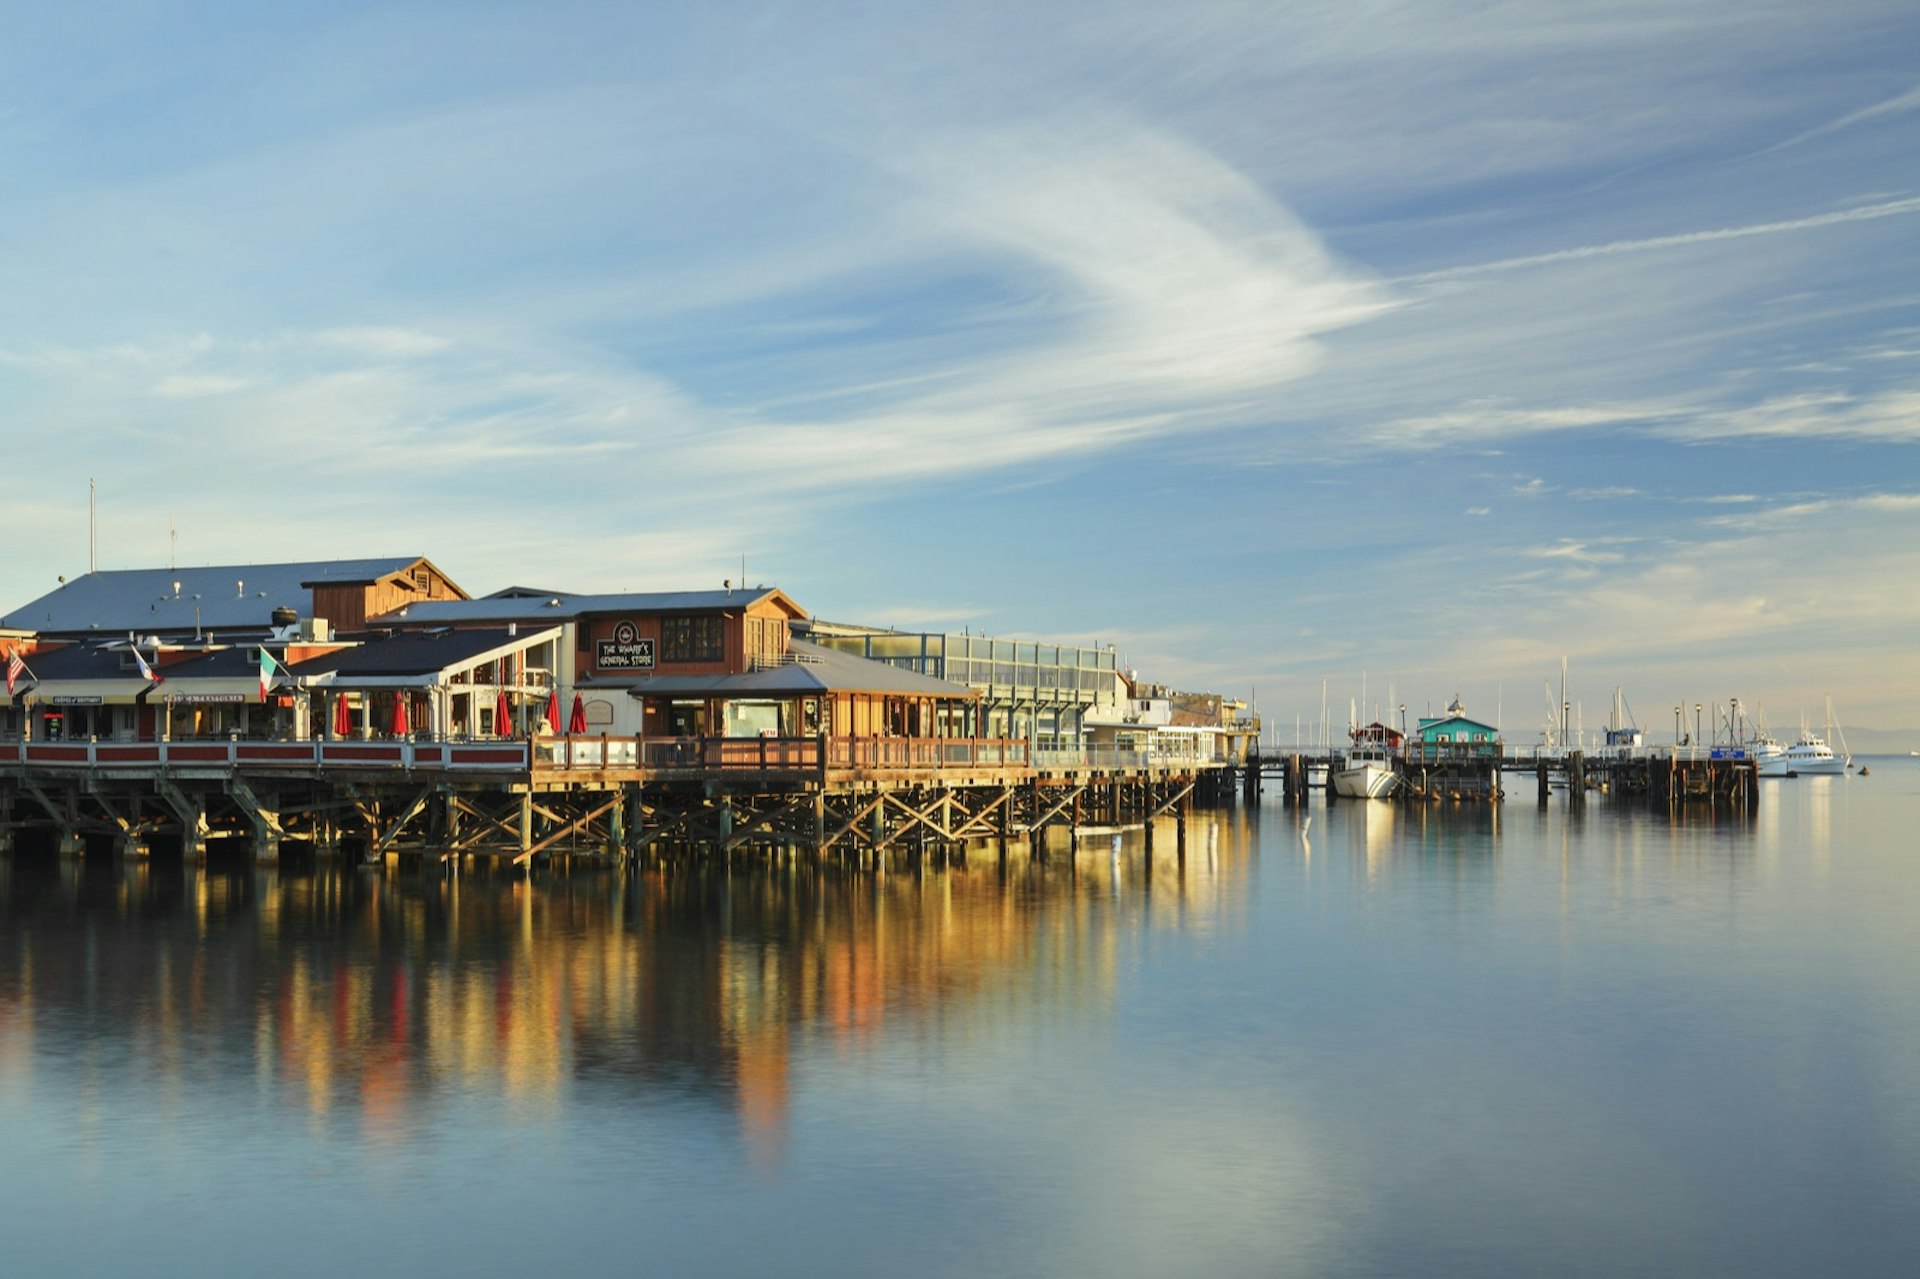 A view of wharf buildings on stilts with a reflection in the water that served as a Big Little Lies filming location in Monterey